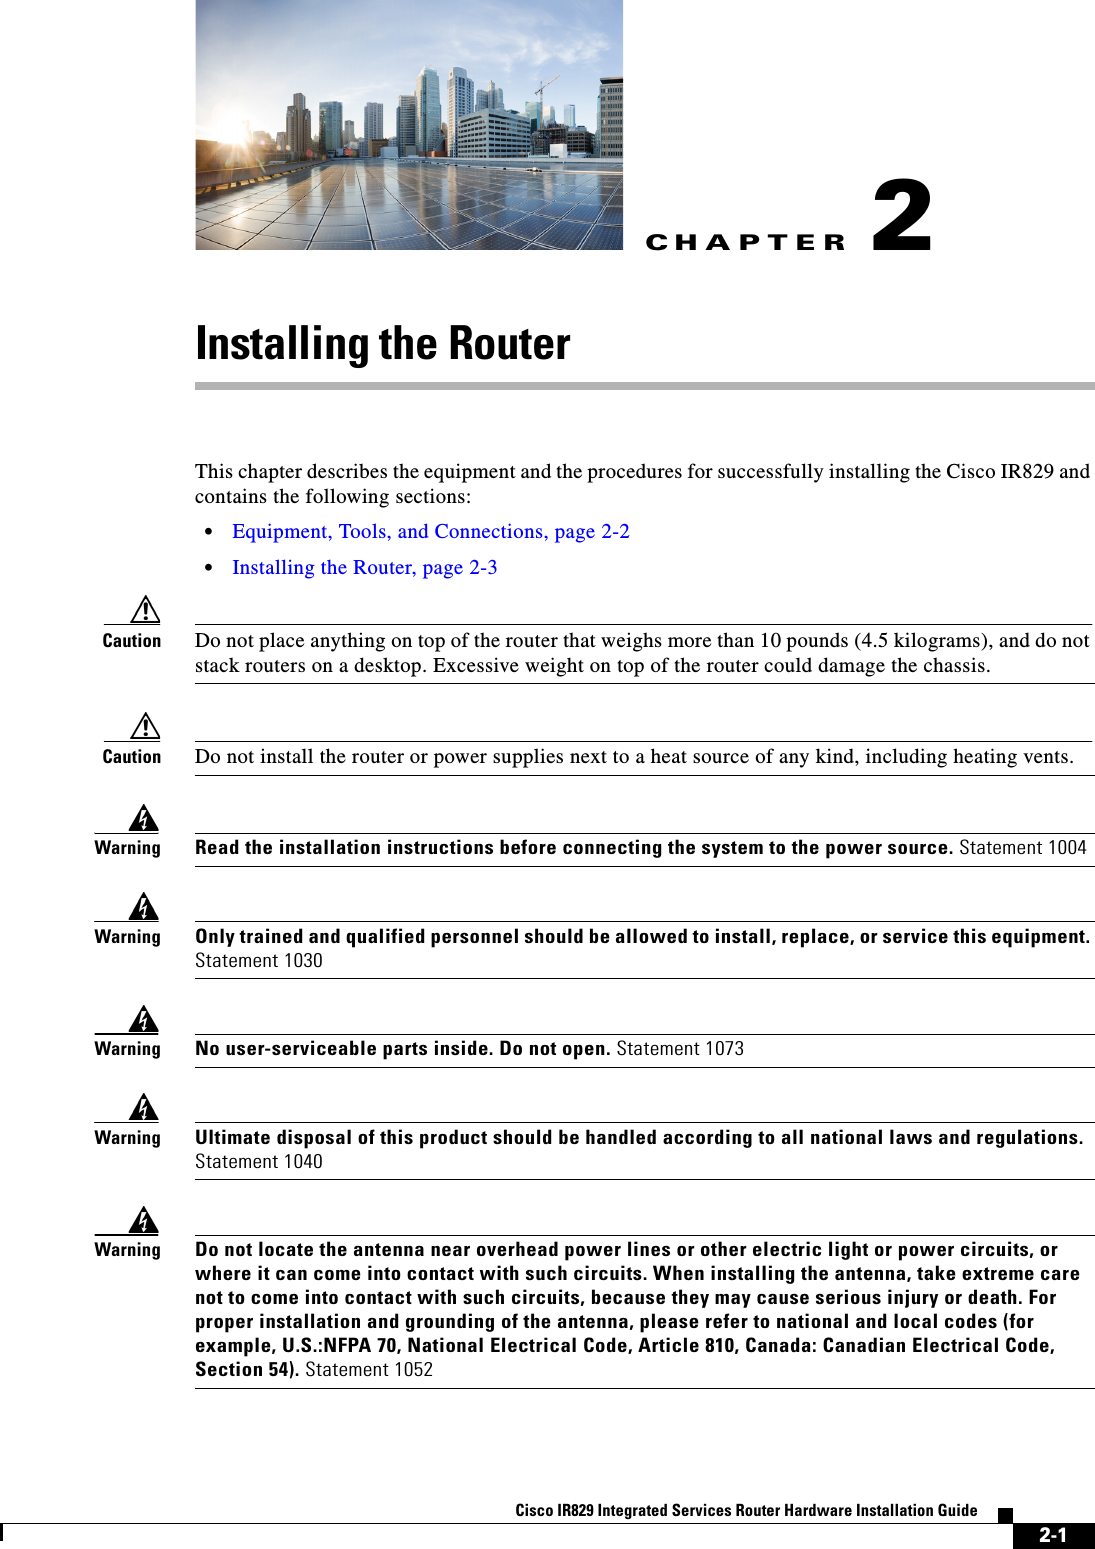 CHAPTER2-1Cisco IR829 Integrated Services Router Hardware Installation Guide2Installing the RouterThis chapter describes the equipment and the procedures for successfully installing the Cisco IR829 and contains the following sections:   • Equipment, Tools, and Connections, page 2-2  • Installing the Router, page 2-3Caution Do not place anything on top of the router that weighs more than 10 pounds (4.5 kilograms), and do not stack routers on a desktop. Excessive weight on top of the router could damage the chassis.Caution Do not install the router or power supplies next to a heat source of any kind, including heating vents.WarningRead the installation instructions before connecting the system to the power source. Statement 1004WarningOnly trained and qualified personnel should be allowed to install, replace, or service this equipment. Statement 1030WarningNo user-serviceable parts inside. Do not open. Statement 1073WarningUltimate disposal of this product should be handled according to all national laws and regulations. Statement 1040WarningDo not locate the antenna near overhead power lines or other electric light or power circuits, or where it can come into contact with such circuits. When installing the antenna, take extreme care not to come into contact with such circuits, because they may cause serious injury or death. For proper installation and grounding of the antenna, please refer to national and local codes (for example, U.S.:NFPA 70, National Electrical Code, Article 810, Canada: Canadian Electrical Code, Section 54). Statement 1052